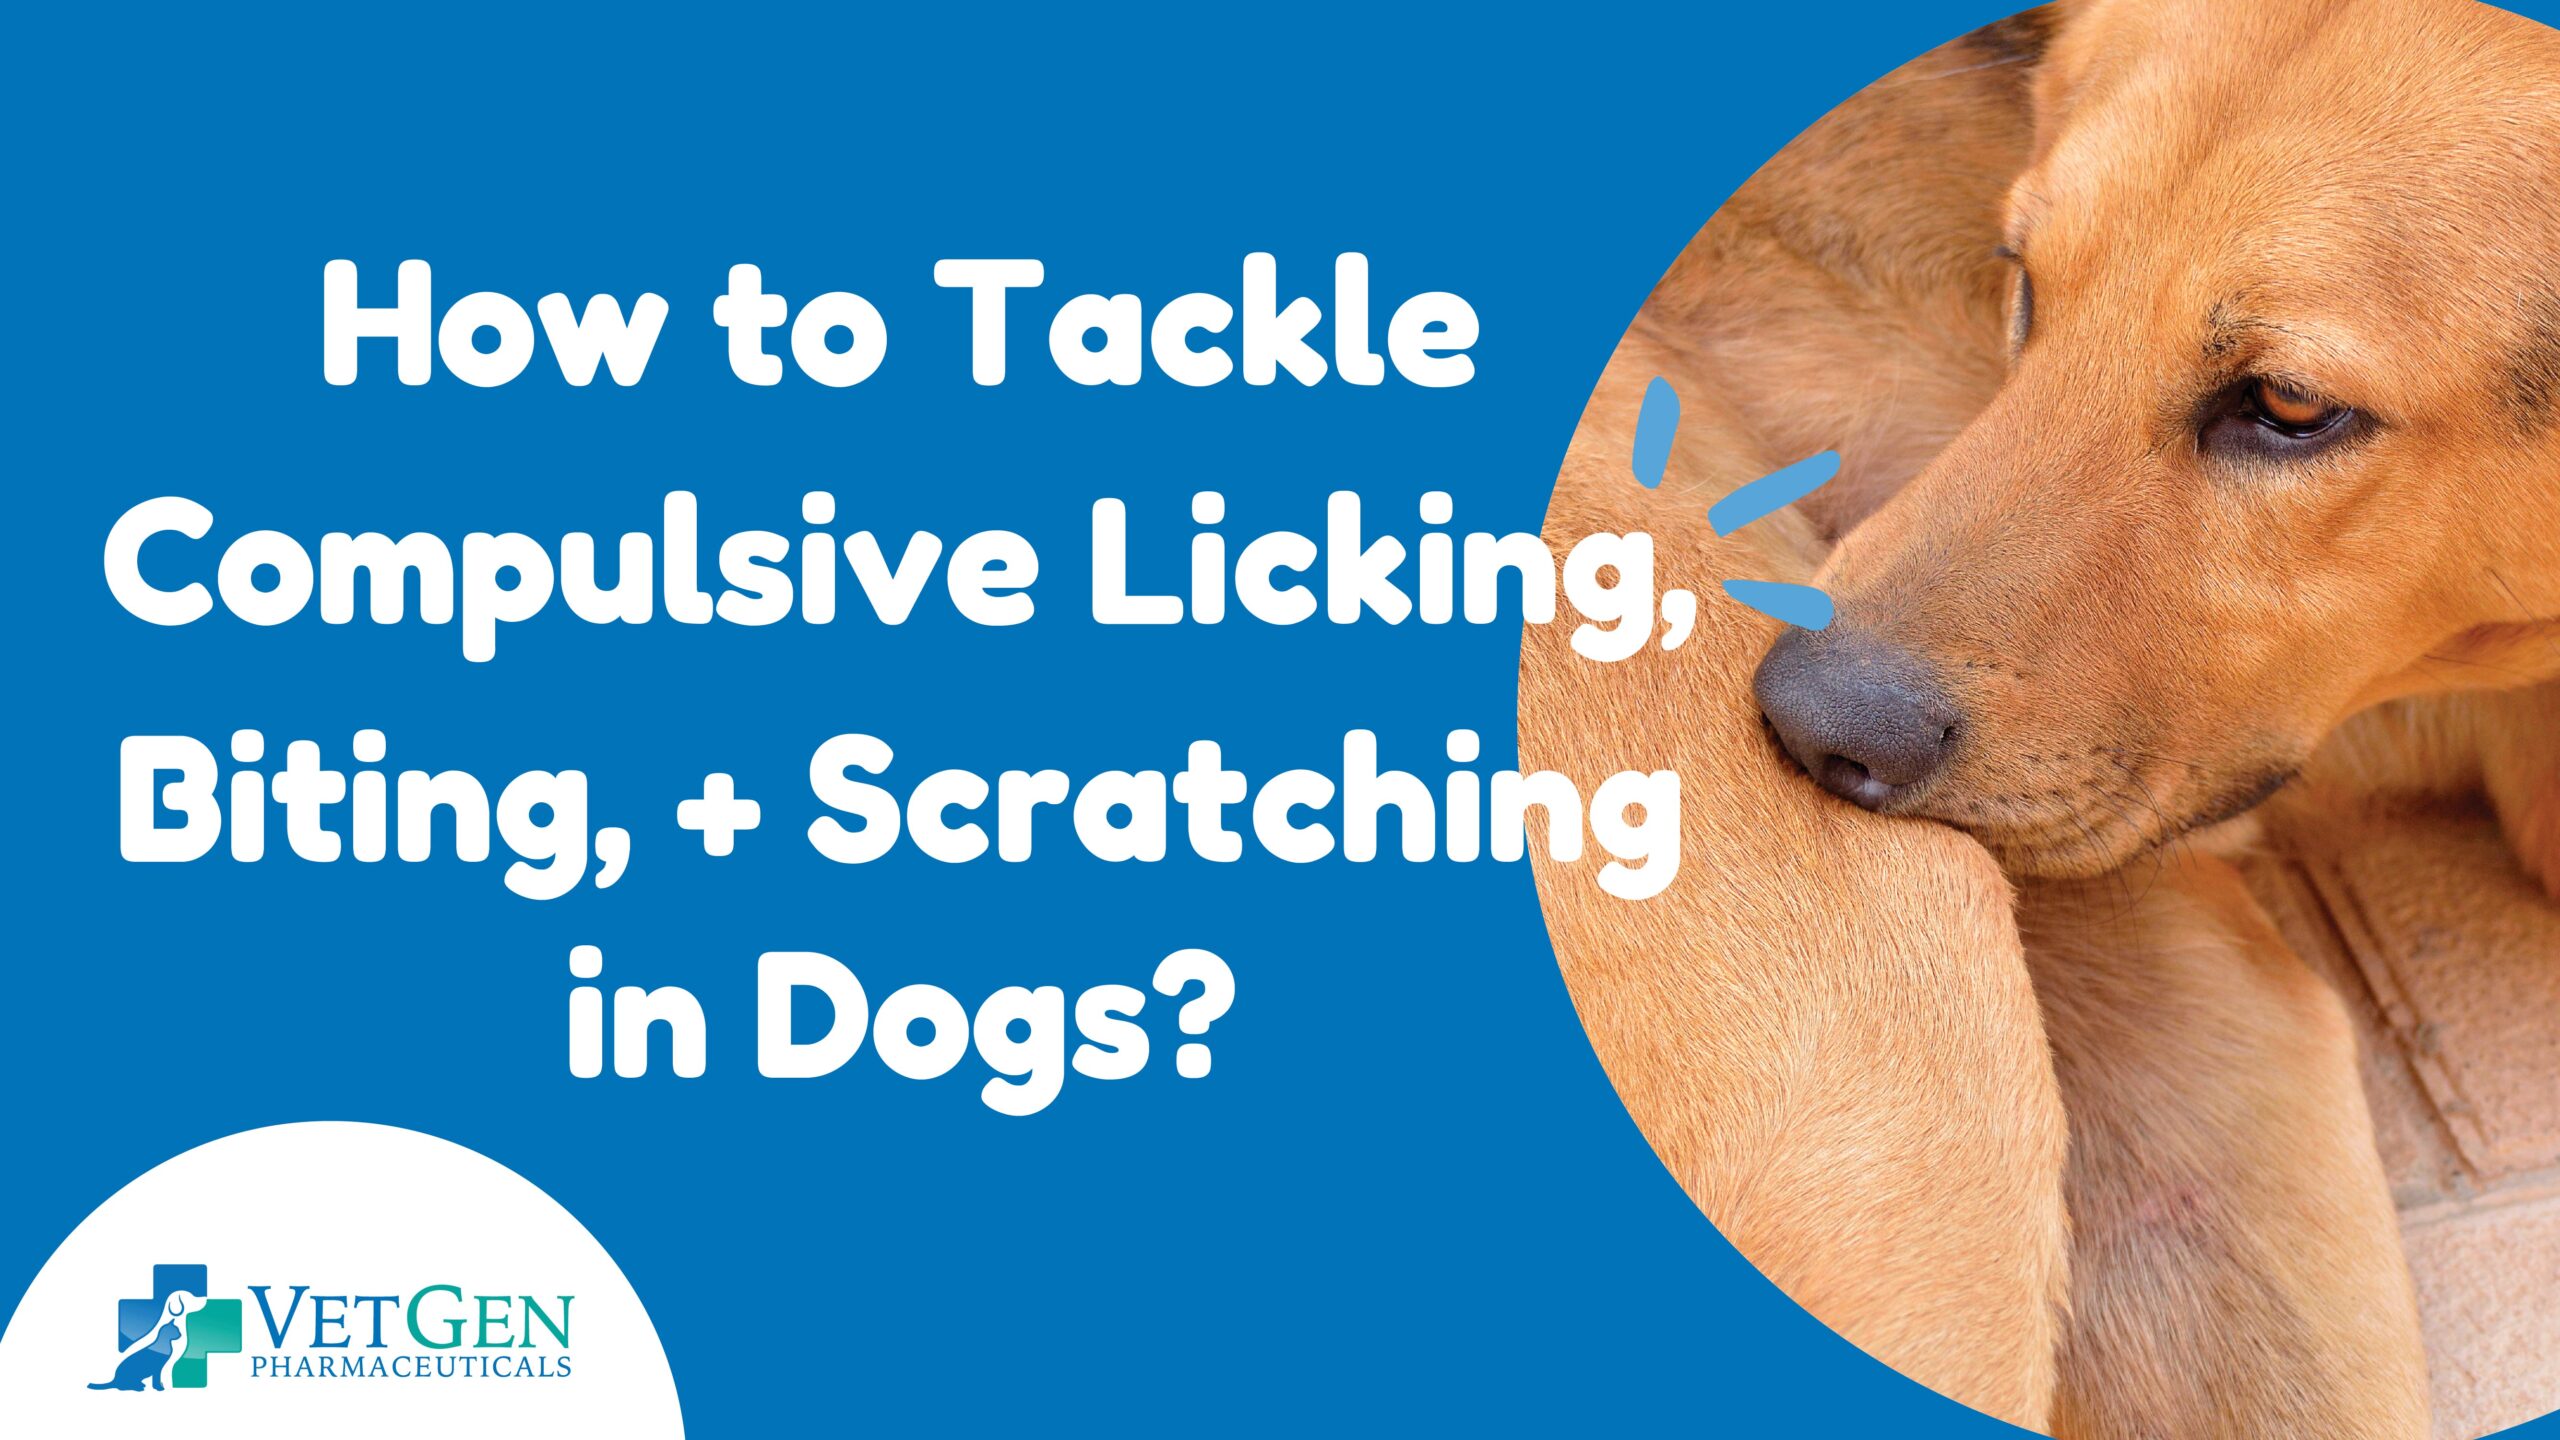 How to Tackle Compulsive Licking Biting + Scratching in Dogs